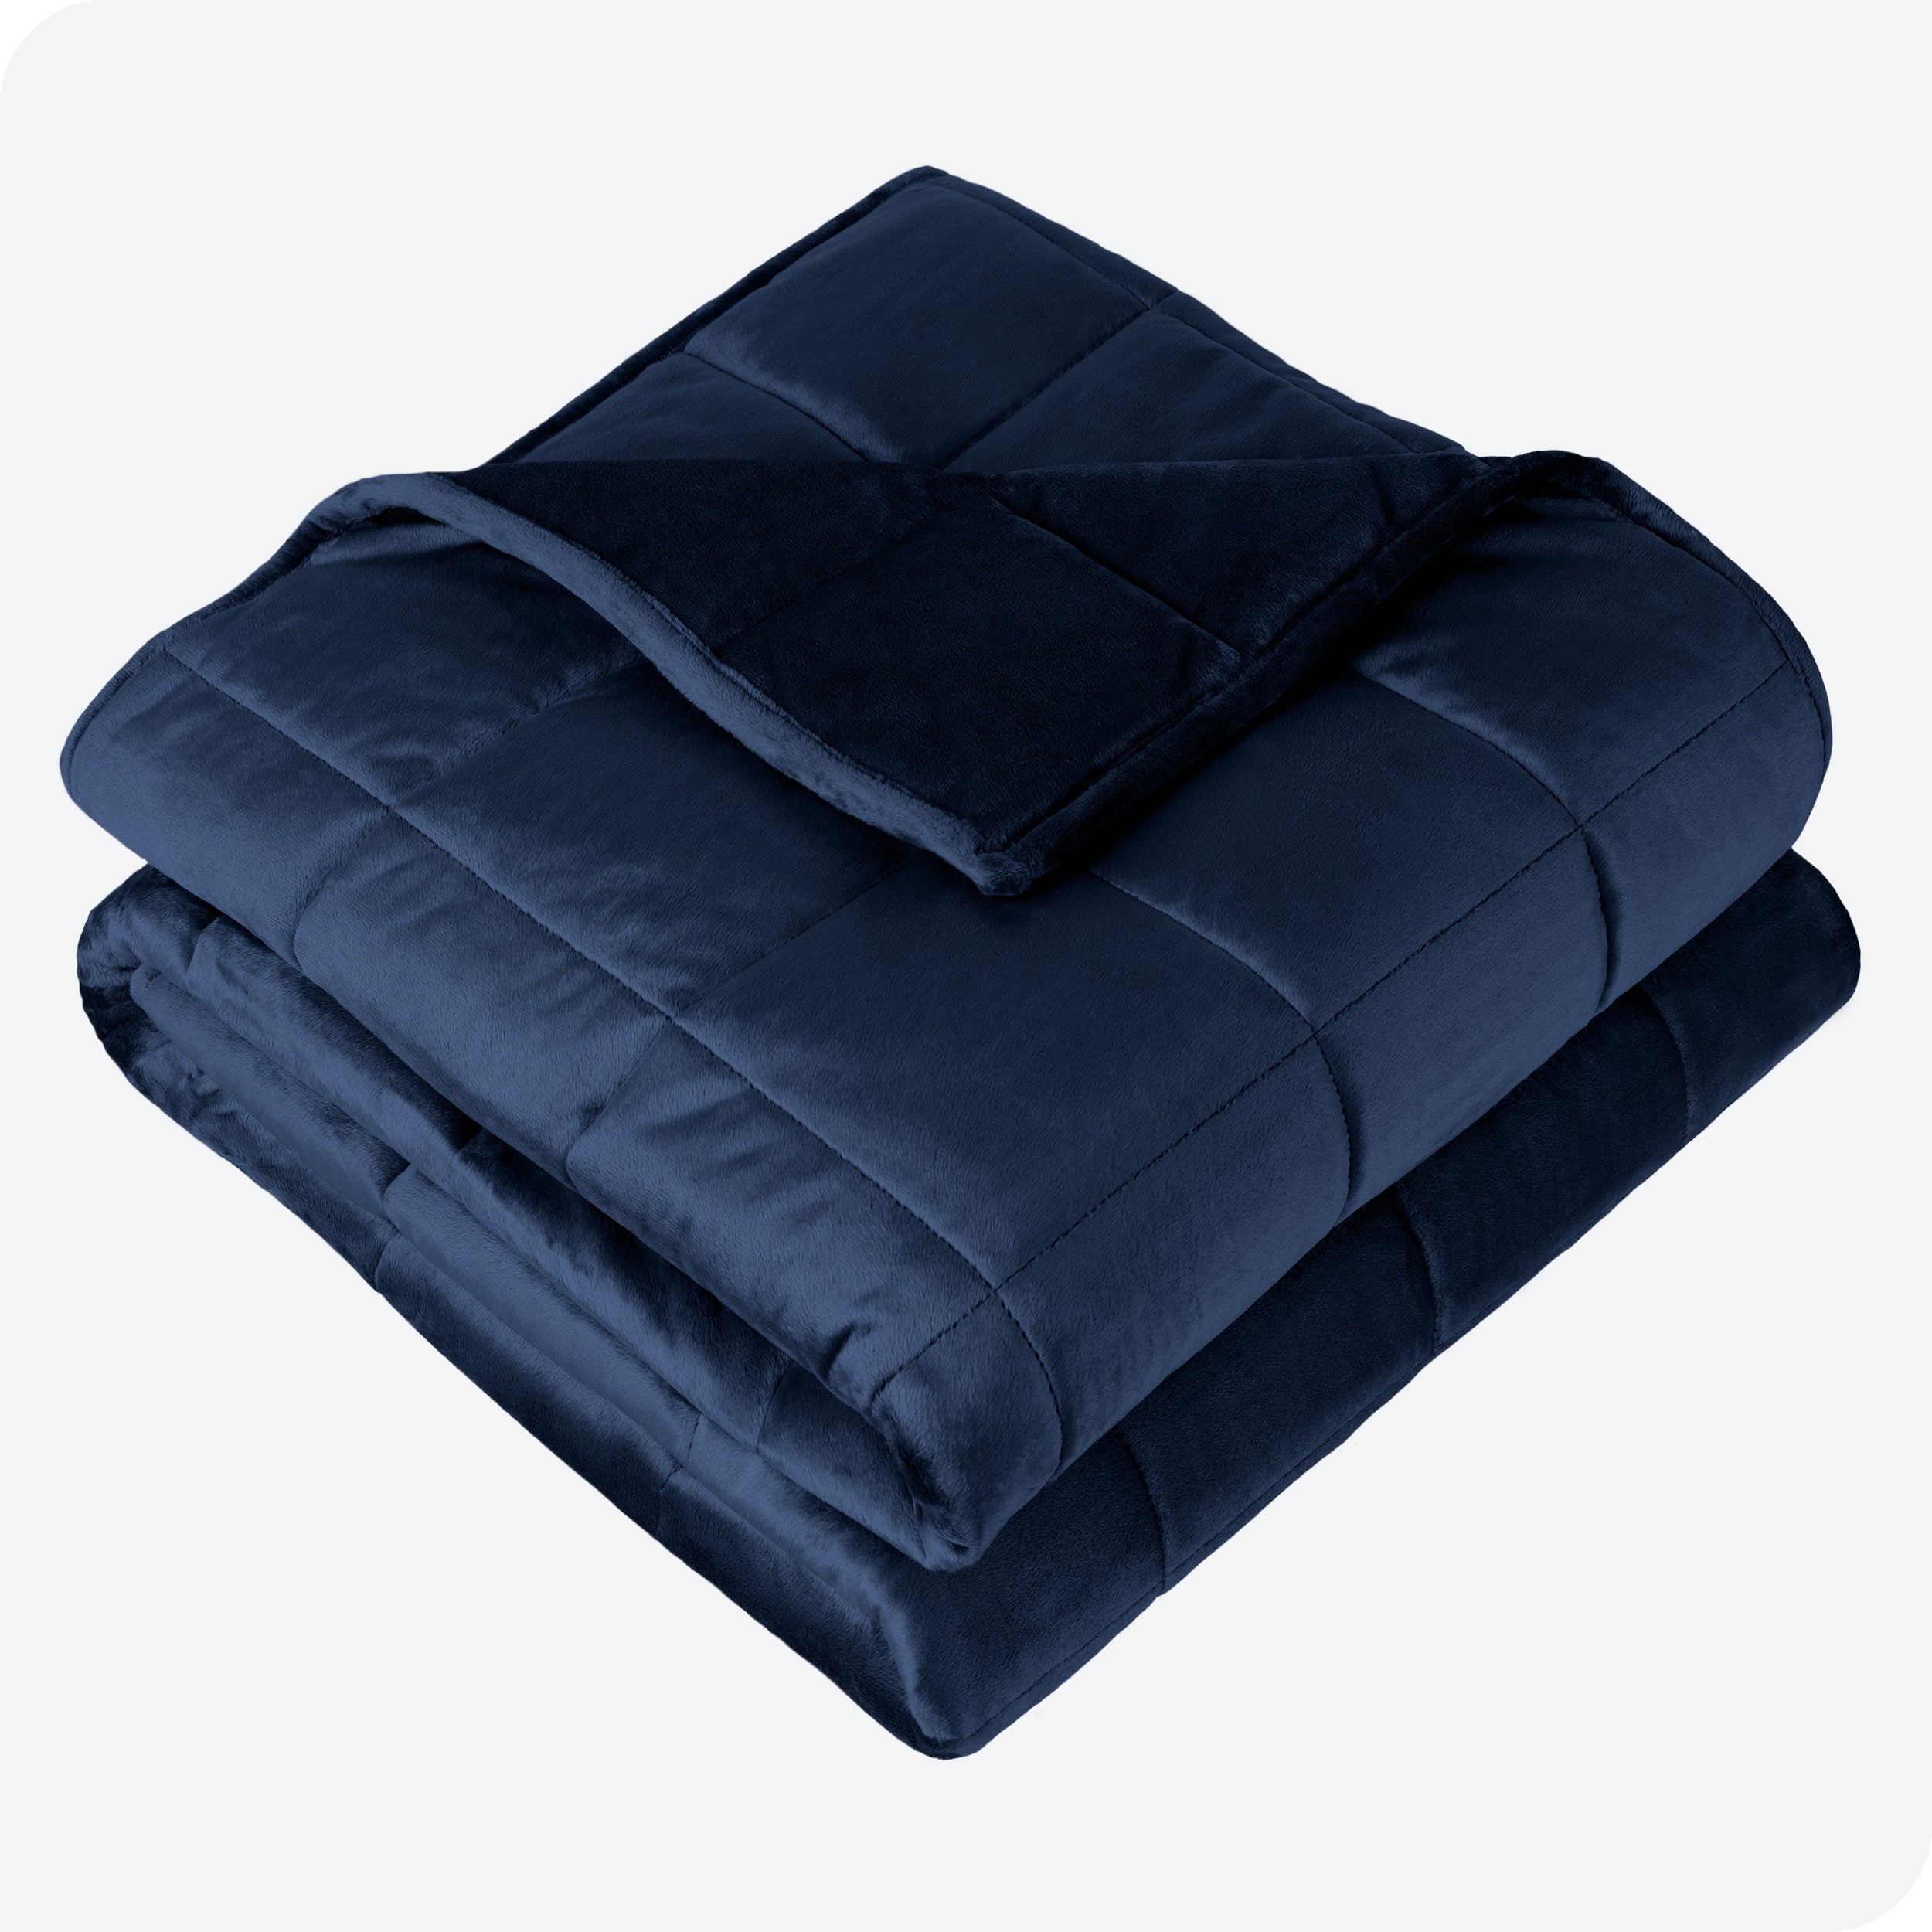 A minky weighted blanket folded neatly on a white background.